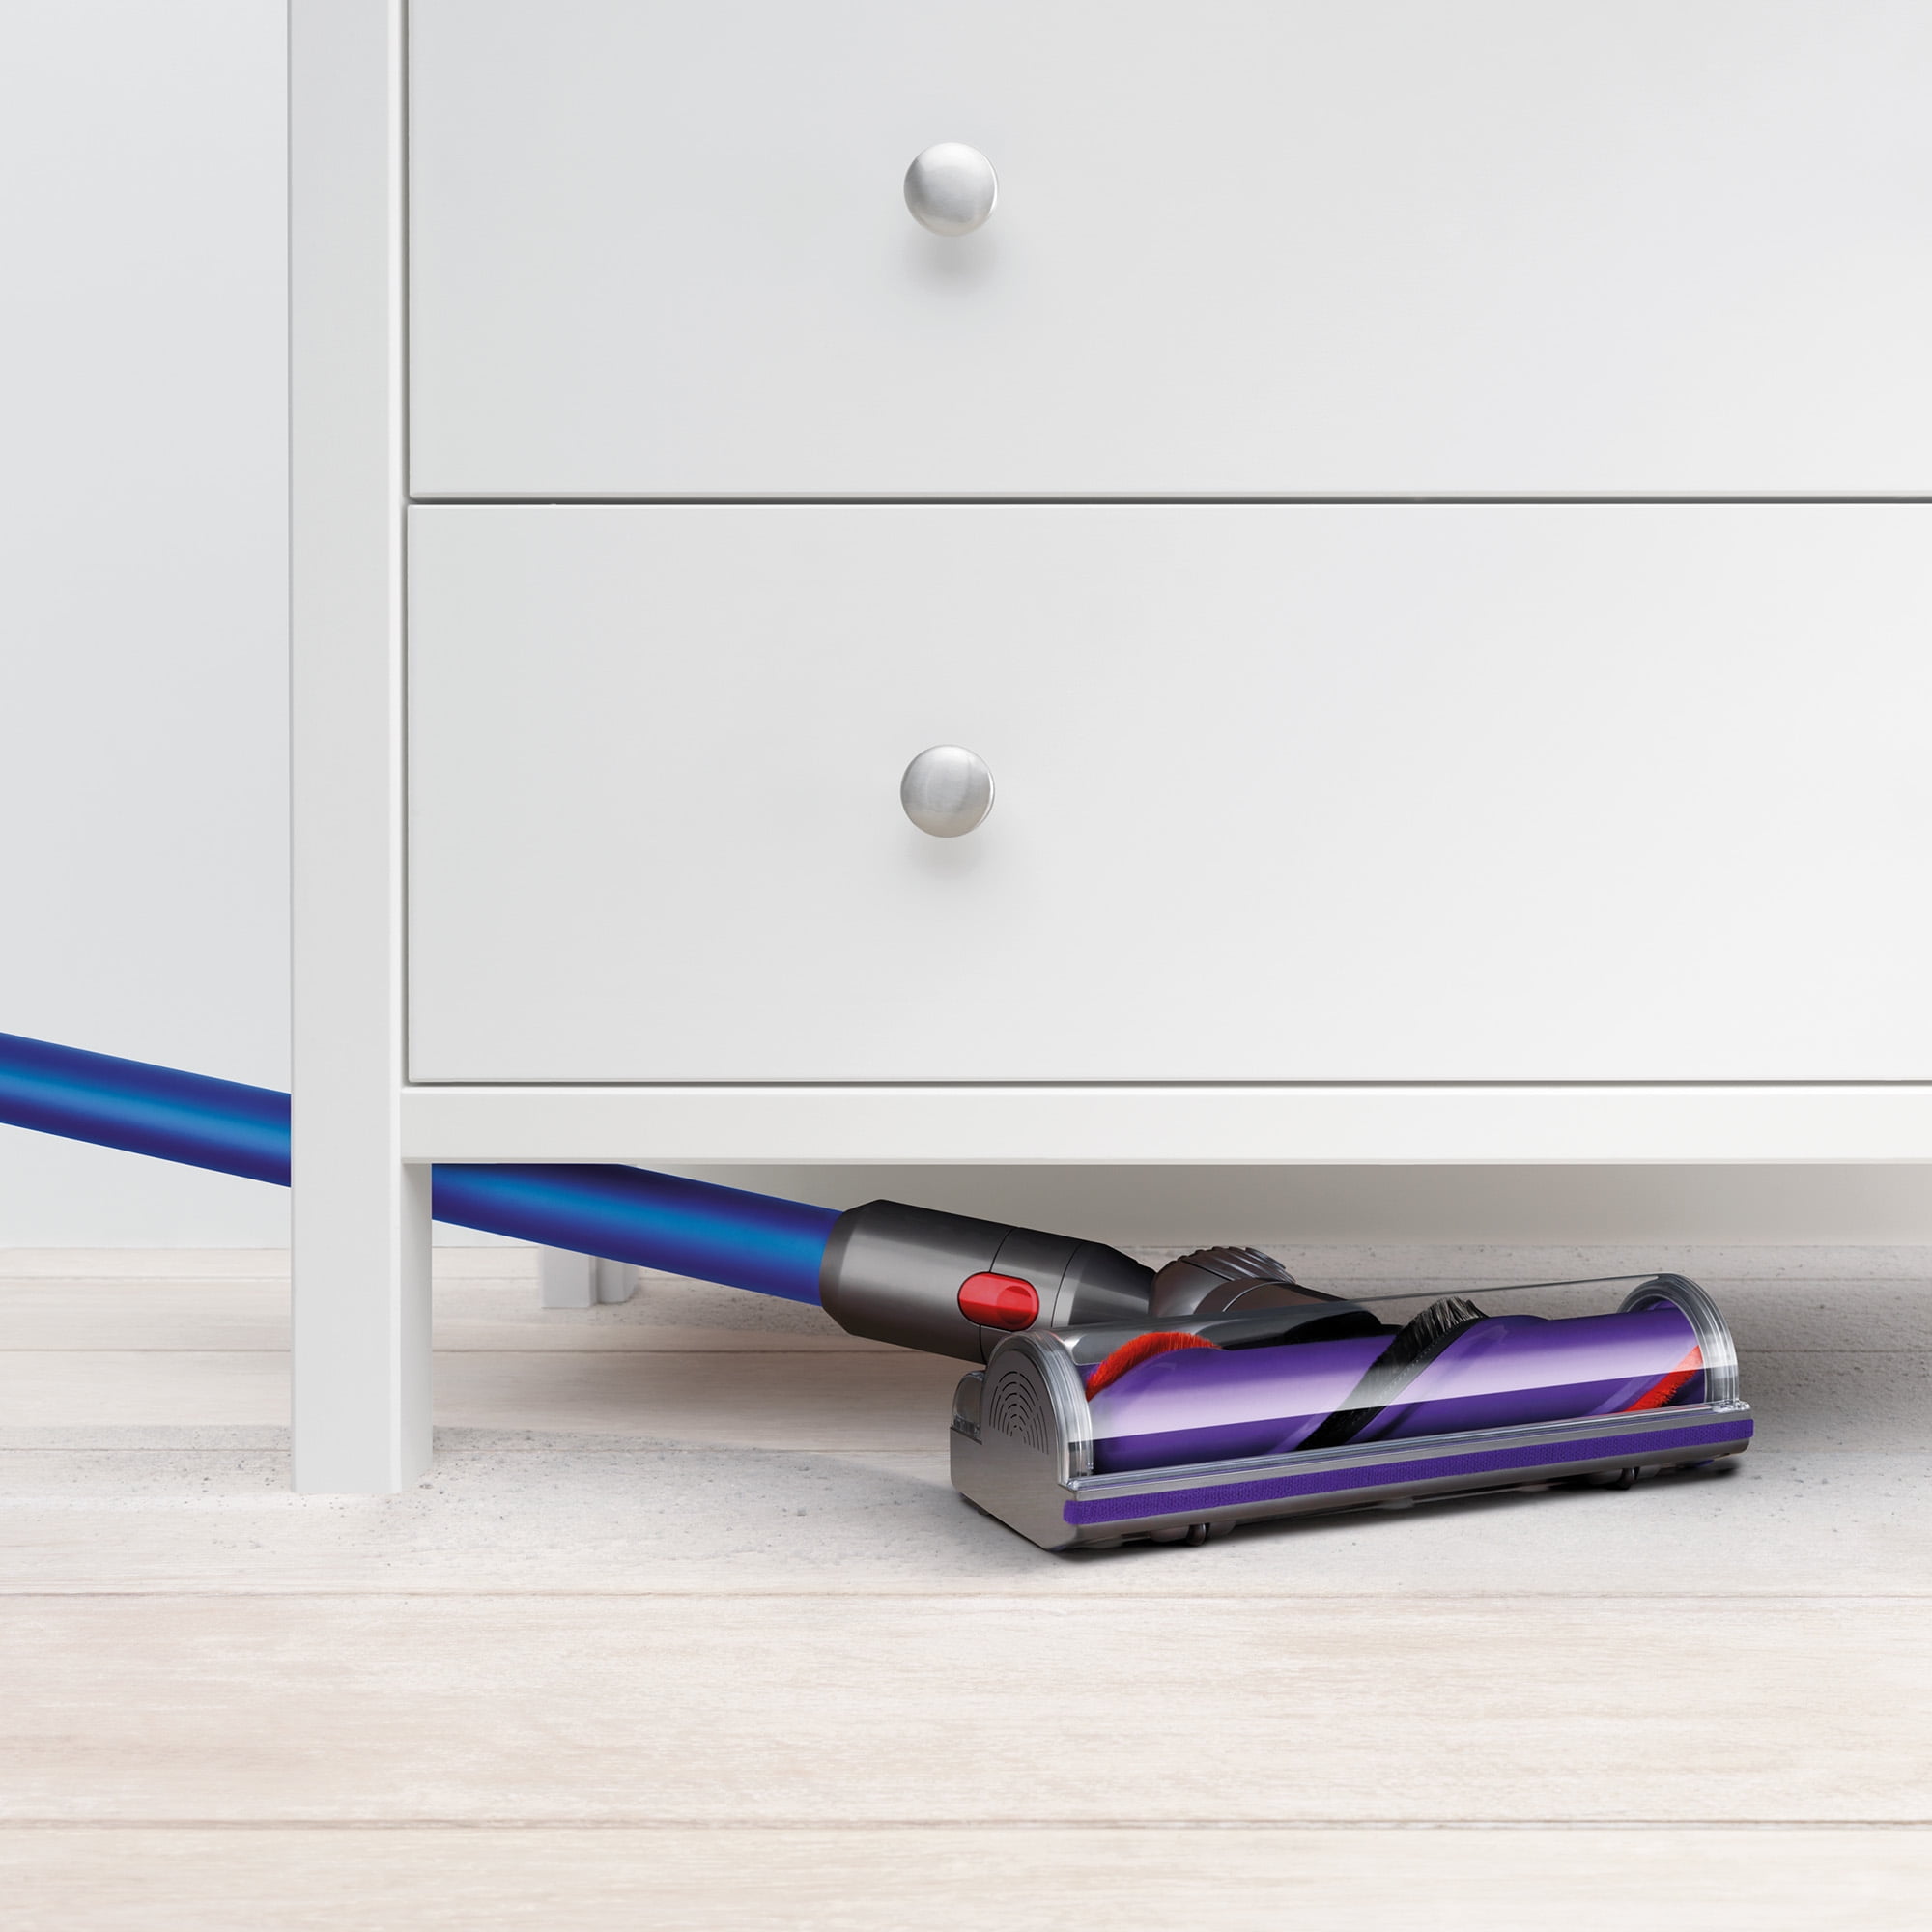 Dyson Cyclone V10: Save $80 on an allergen-busting cordless vacuum